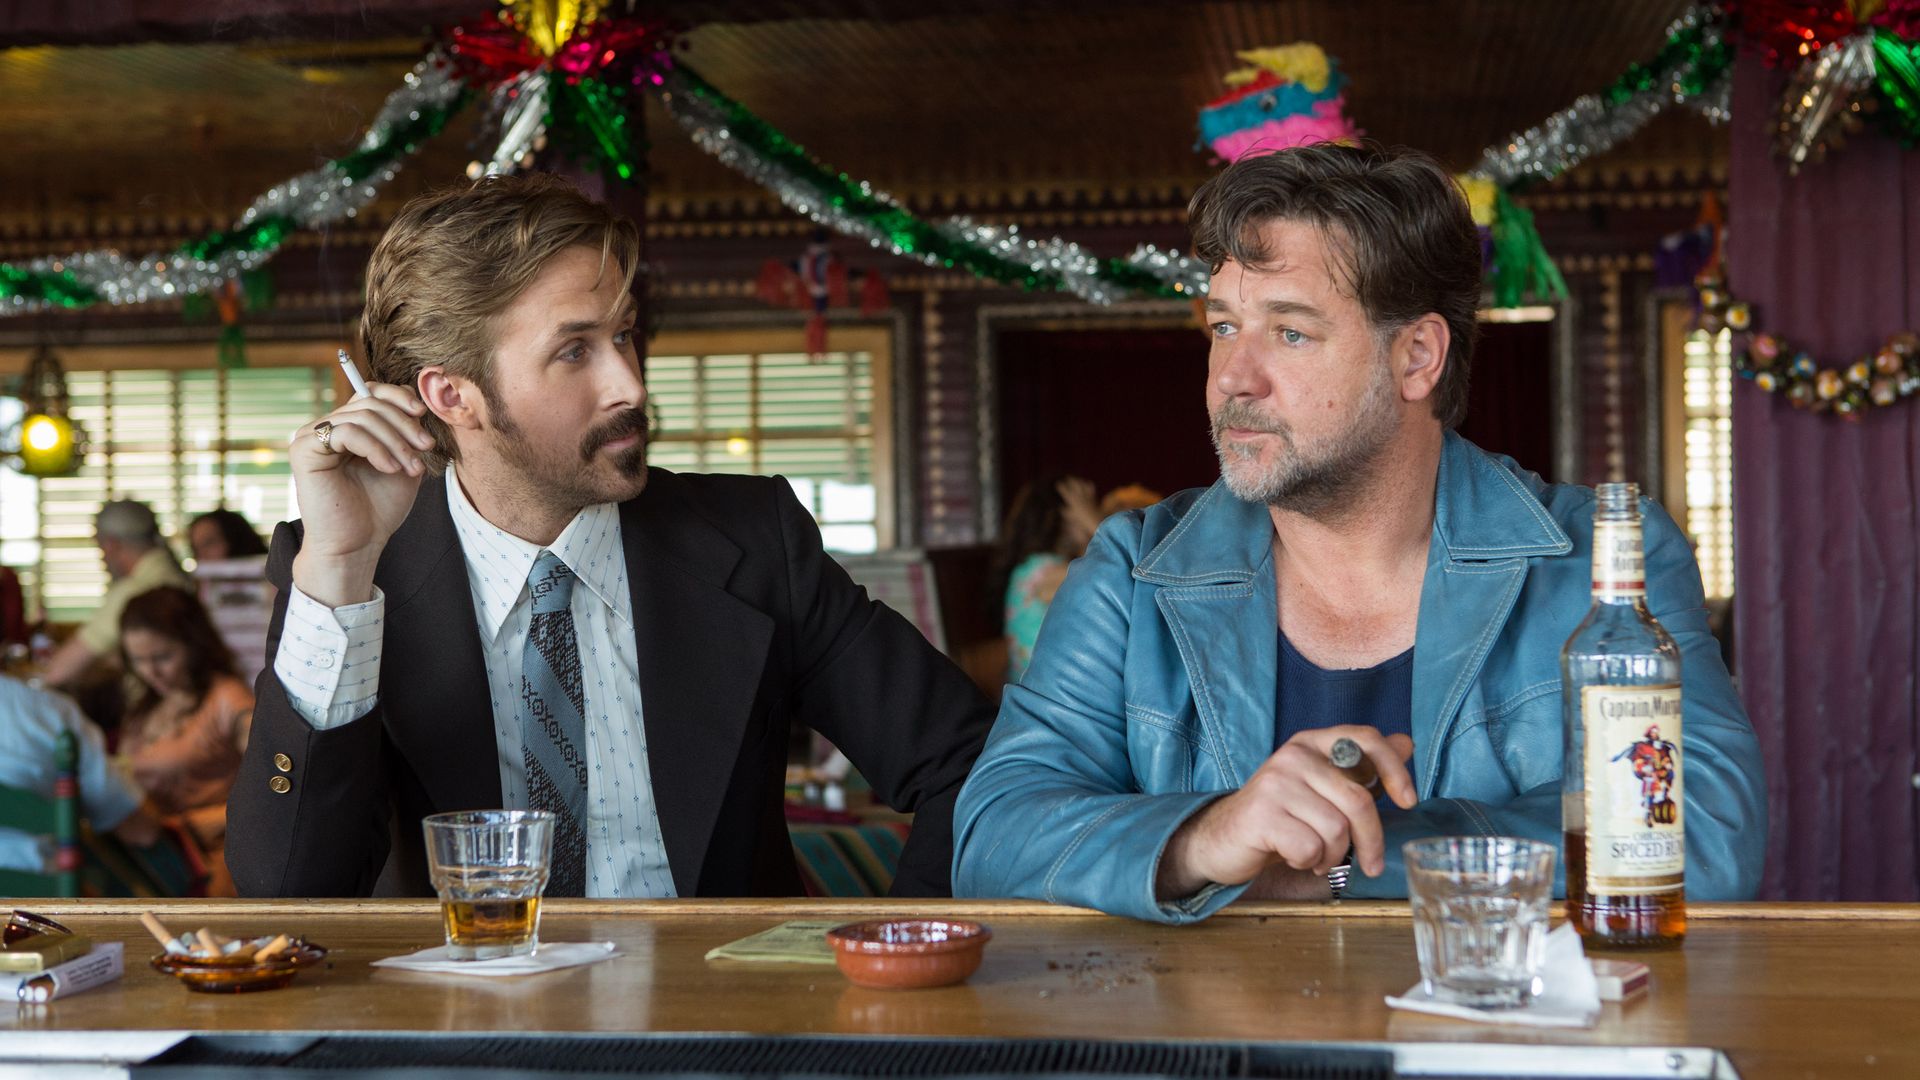 Ryan portrays private eye Holland March in The Nice Guys